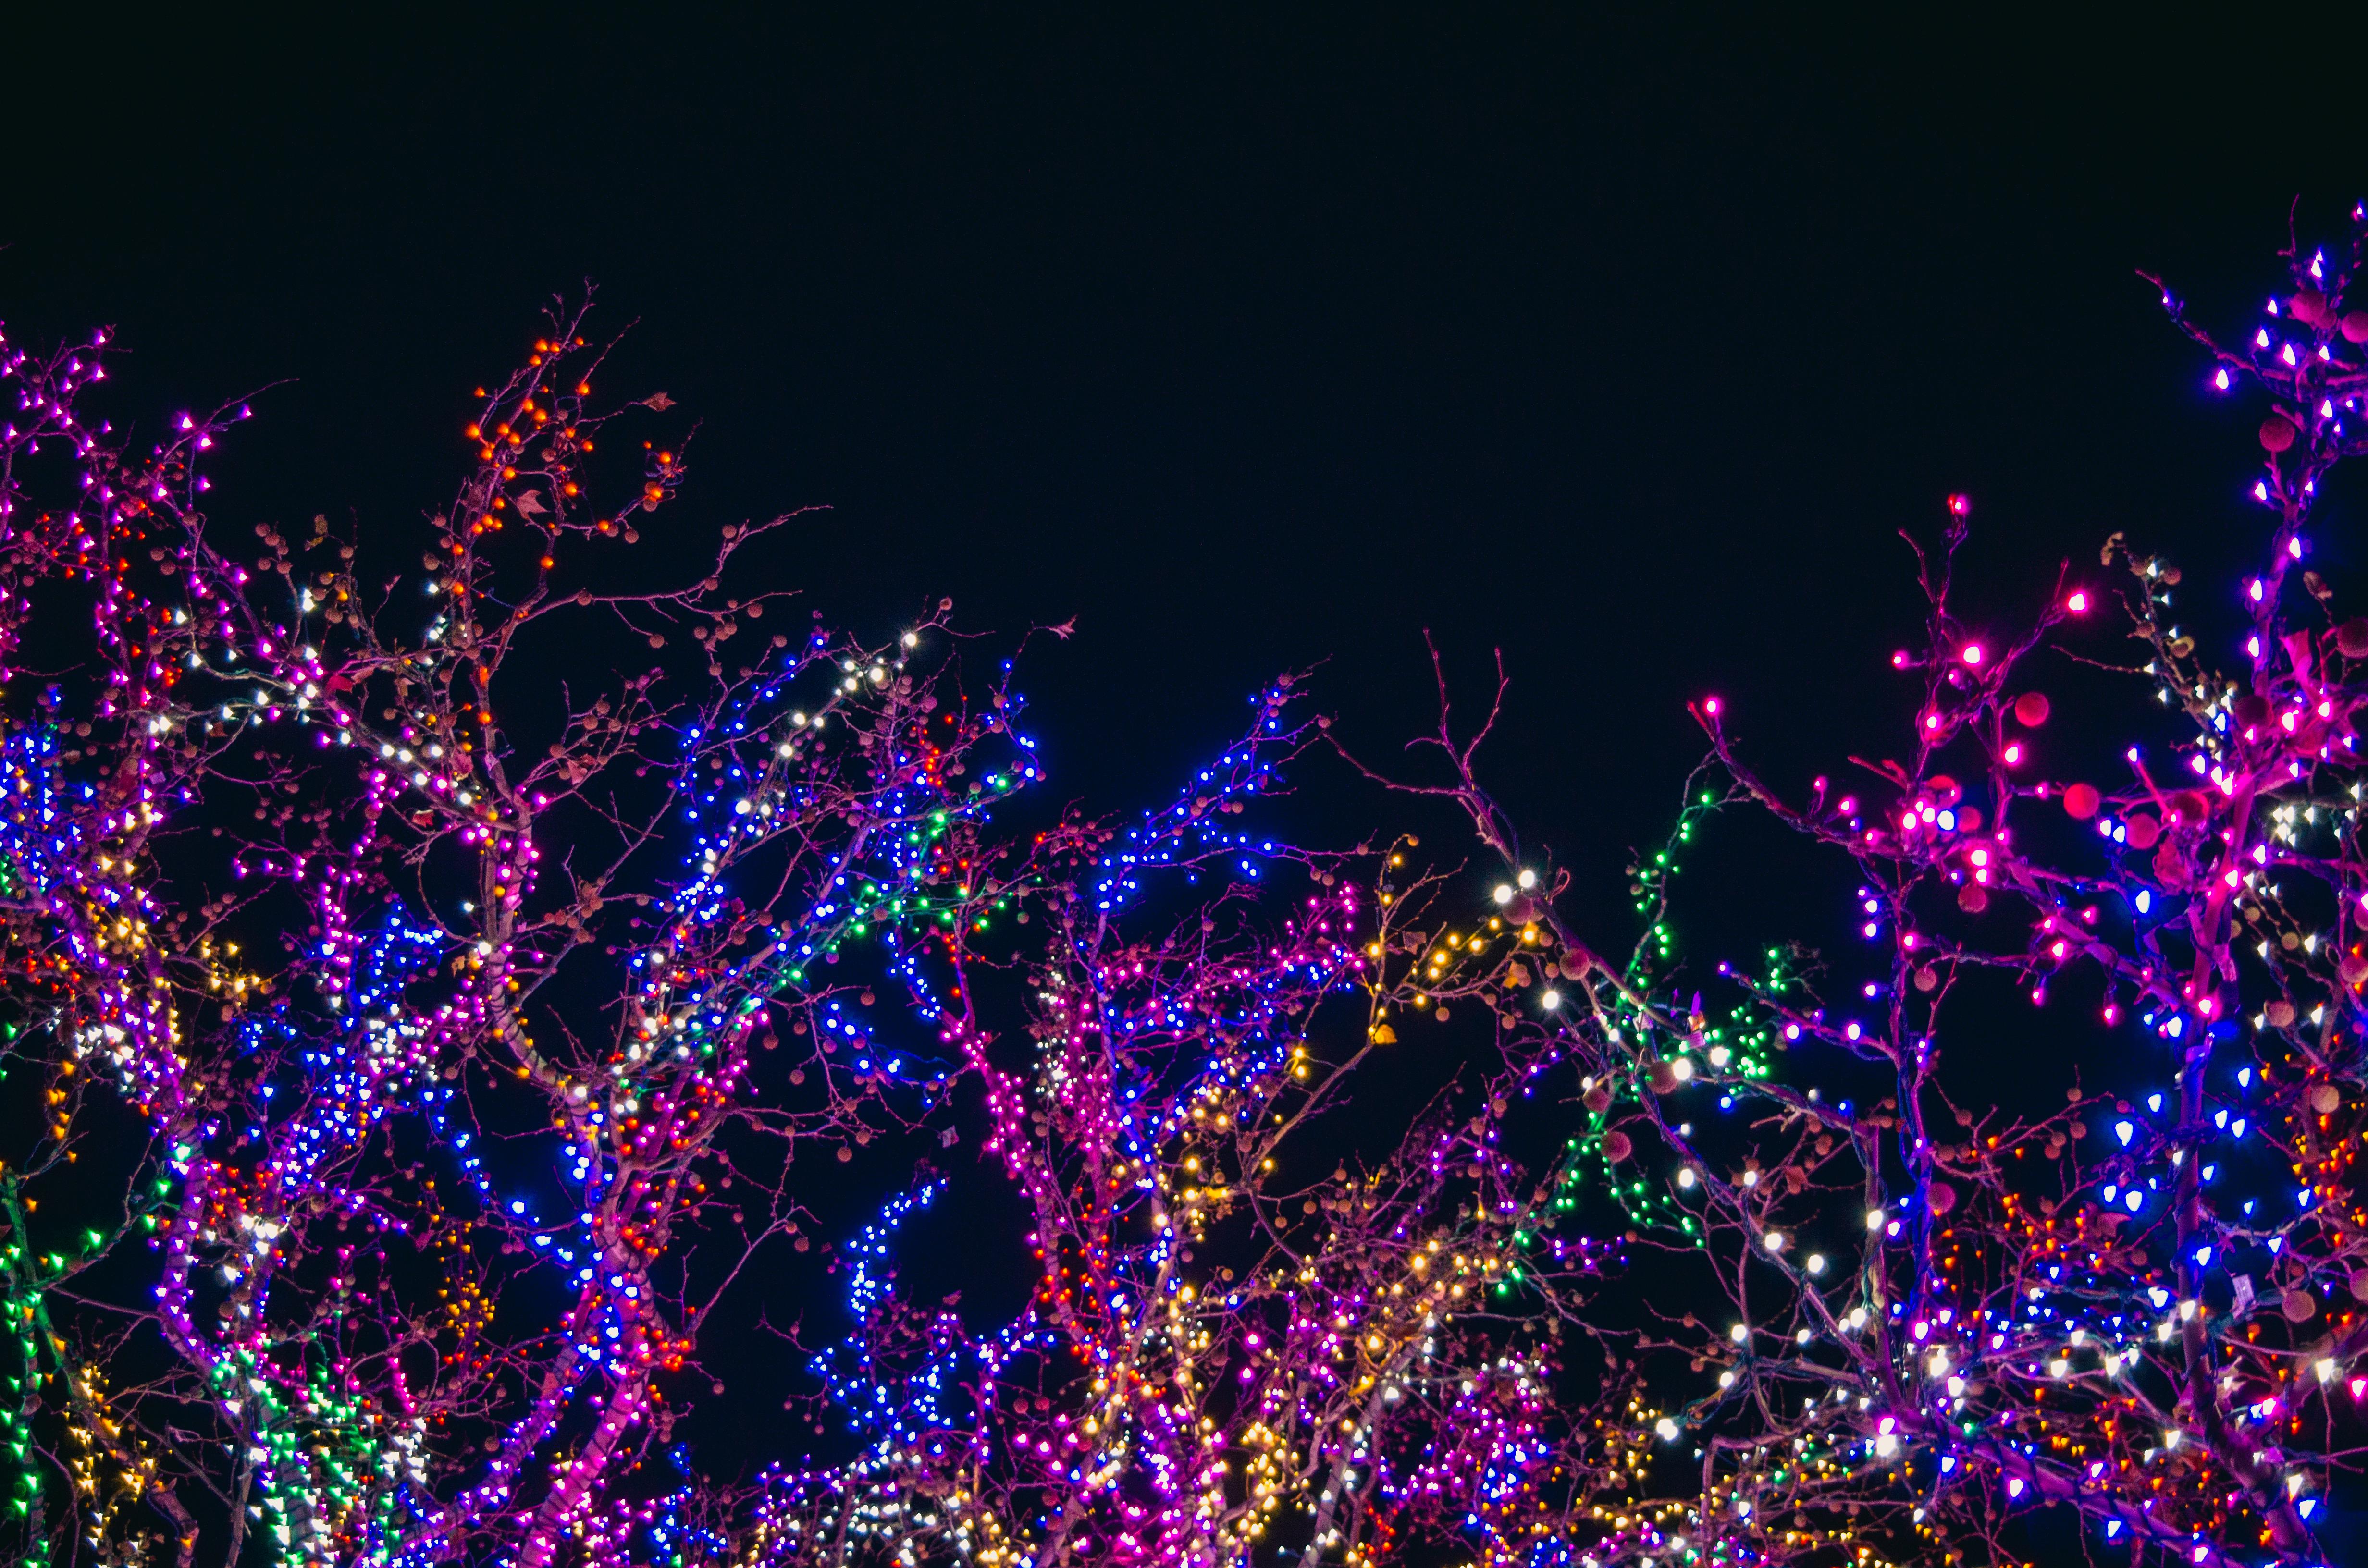 The trees are lit up with colorful lights. - Christmas lights